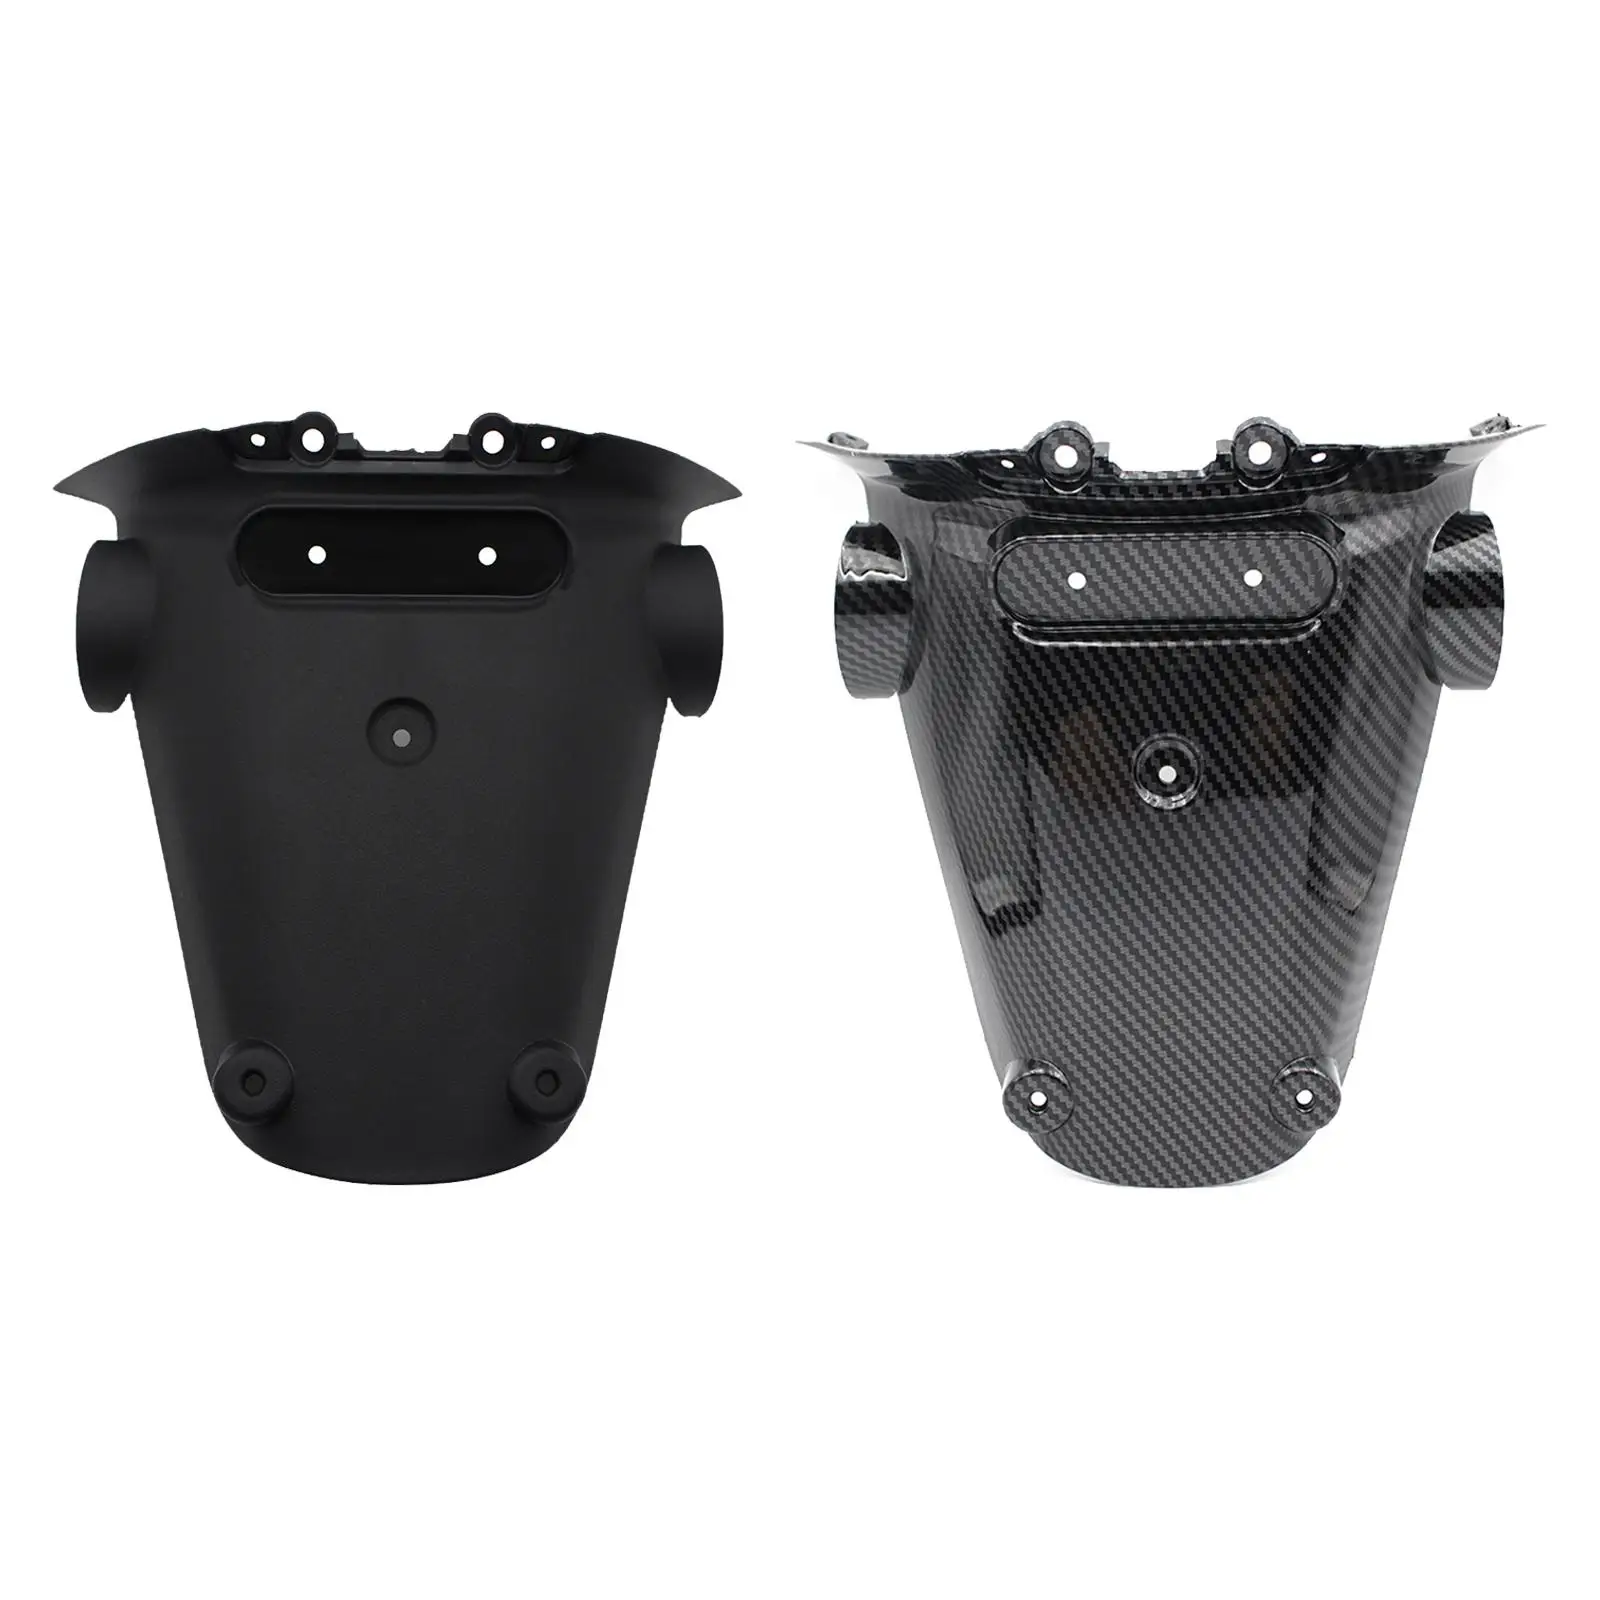 

Motorcycle Rear Replace Parts Guard Mudguard Protector for Sprint Primavera 150 High Performance